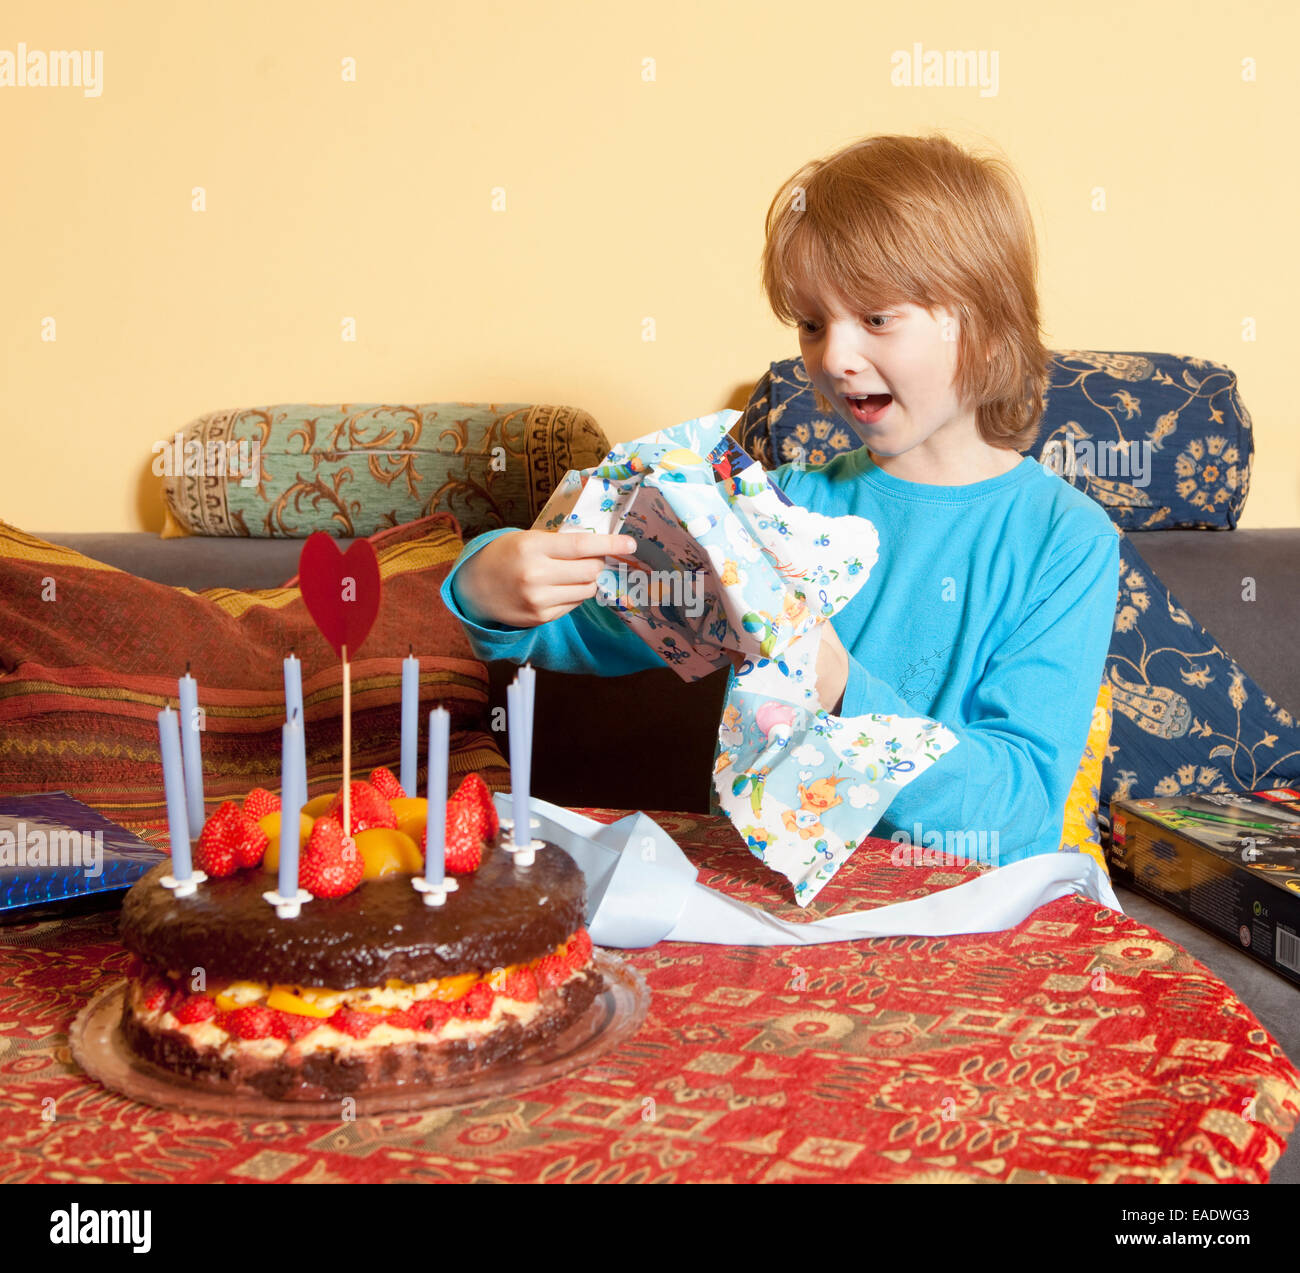 Boy with Blond Hair Opening his Birthday Presents Stock Photo